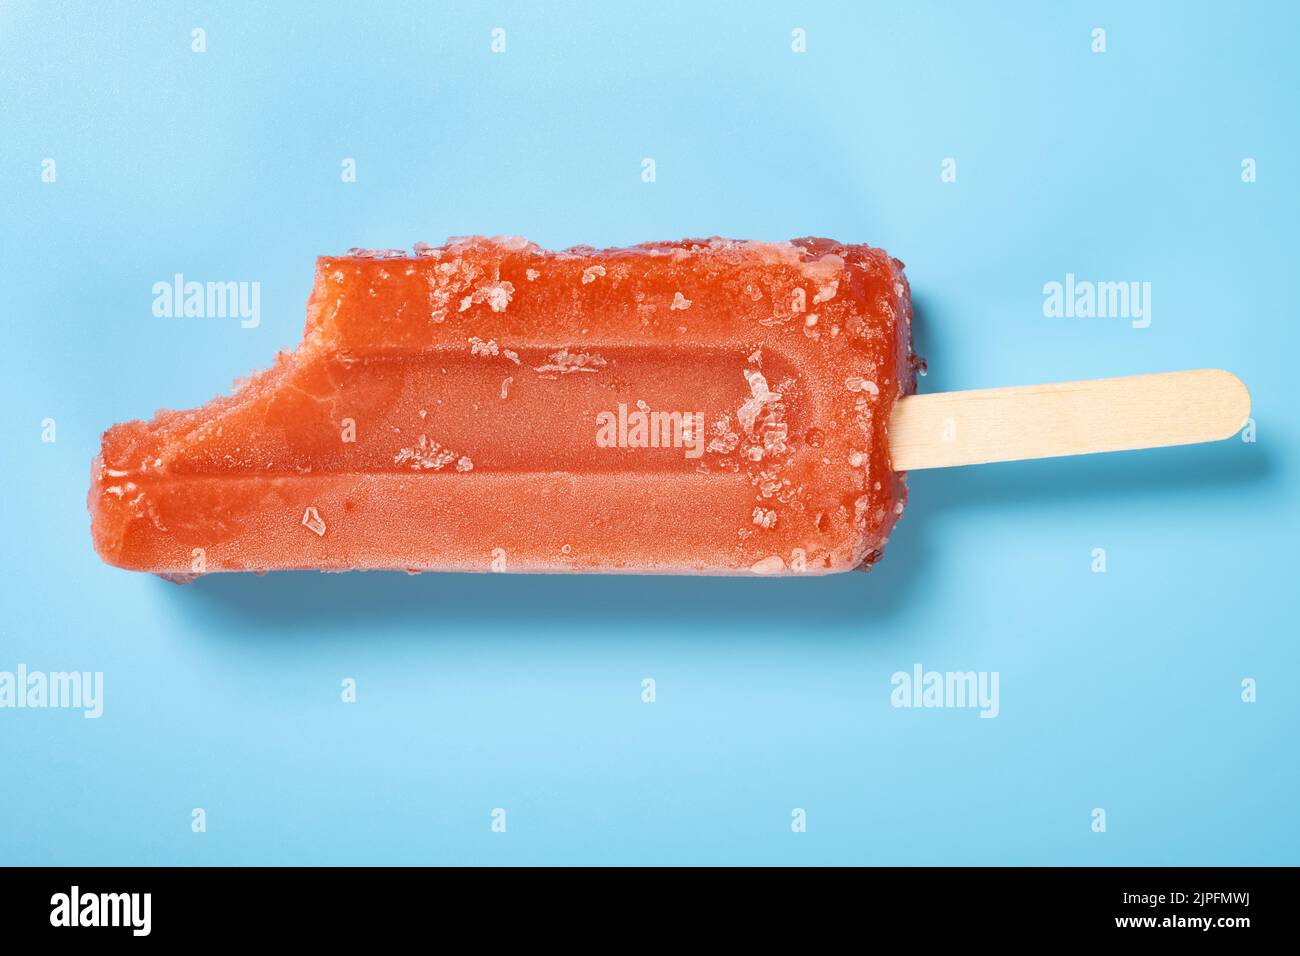 top view fresh red popsicle with a bite on a blue background Stock Photo